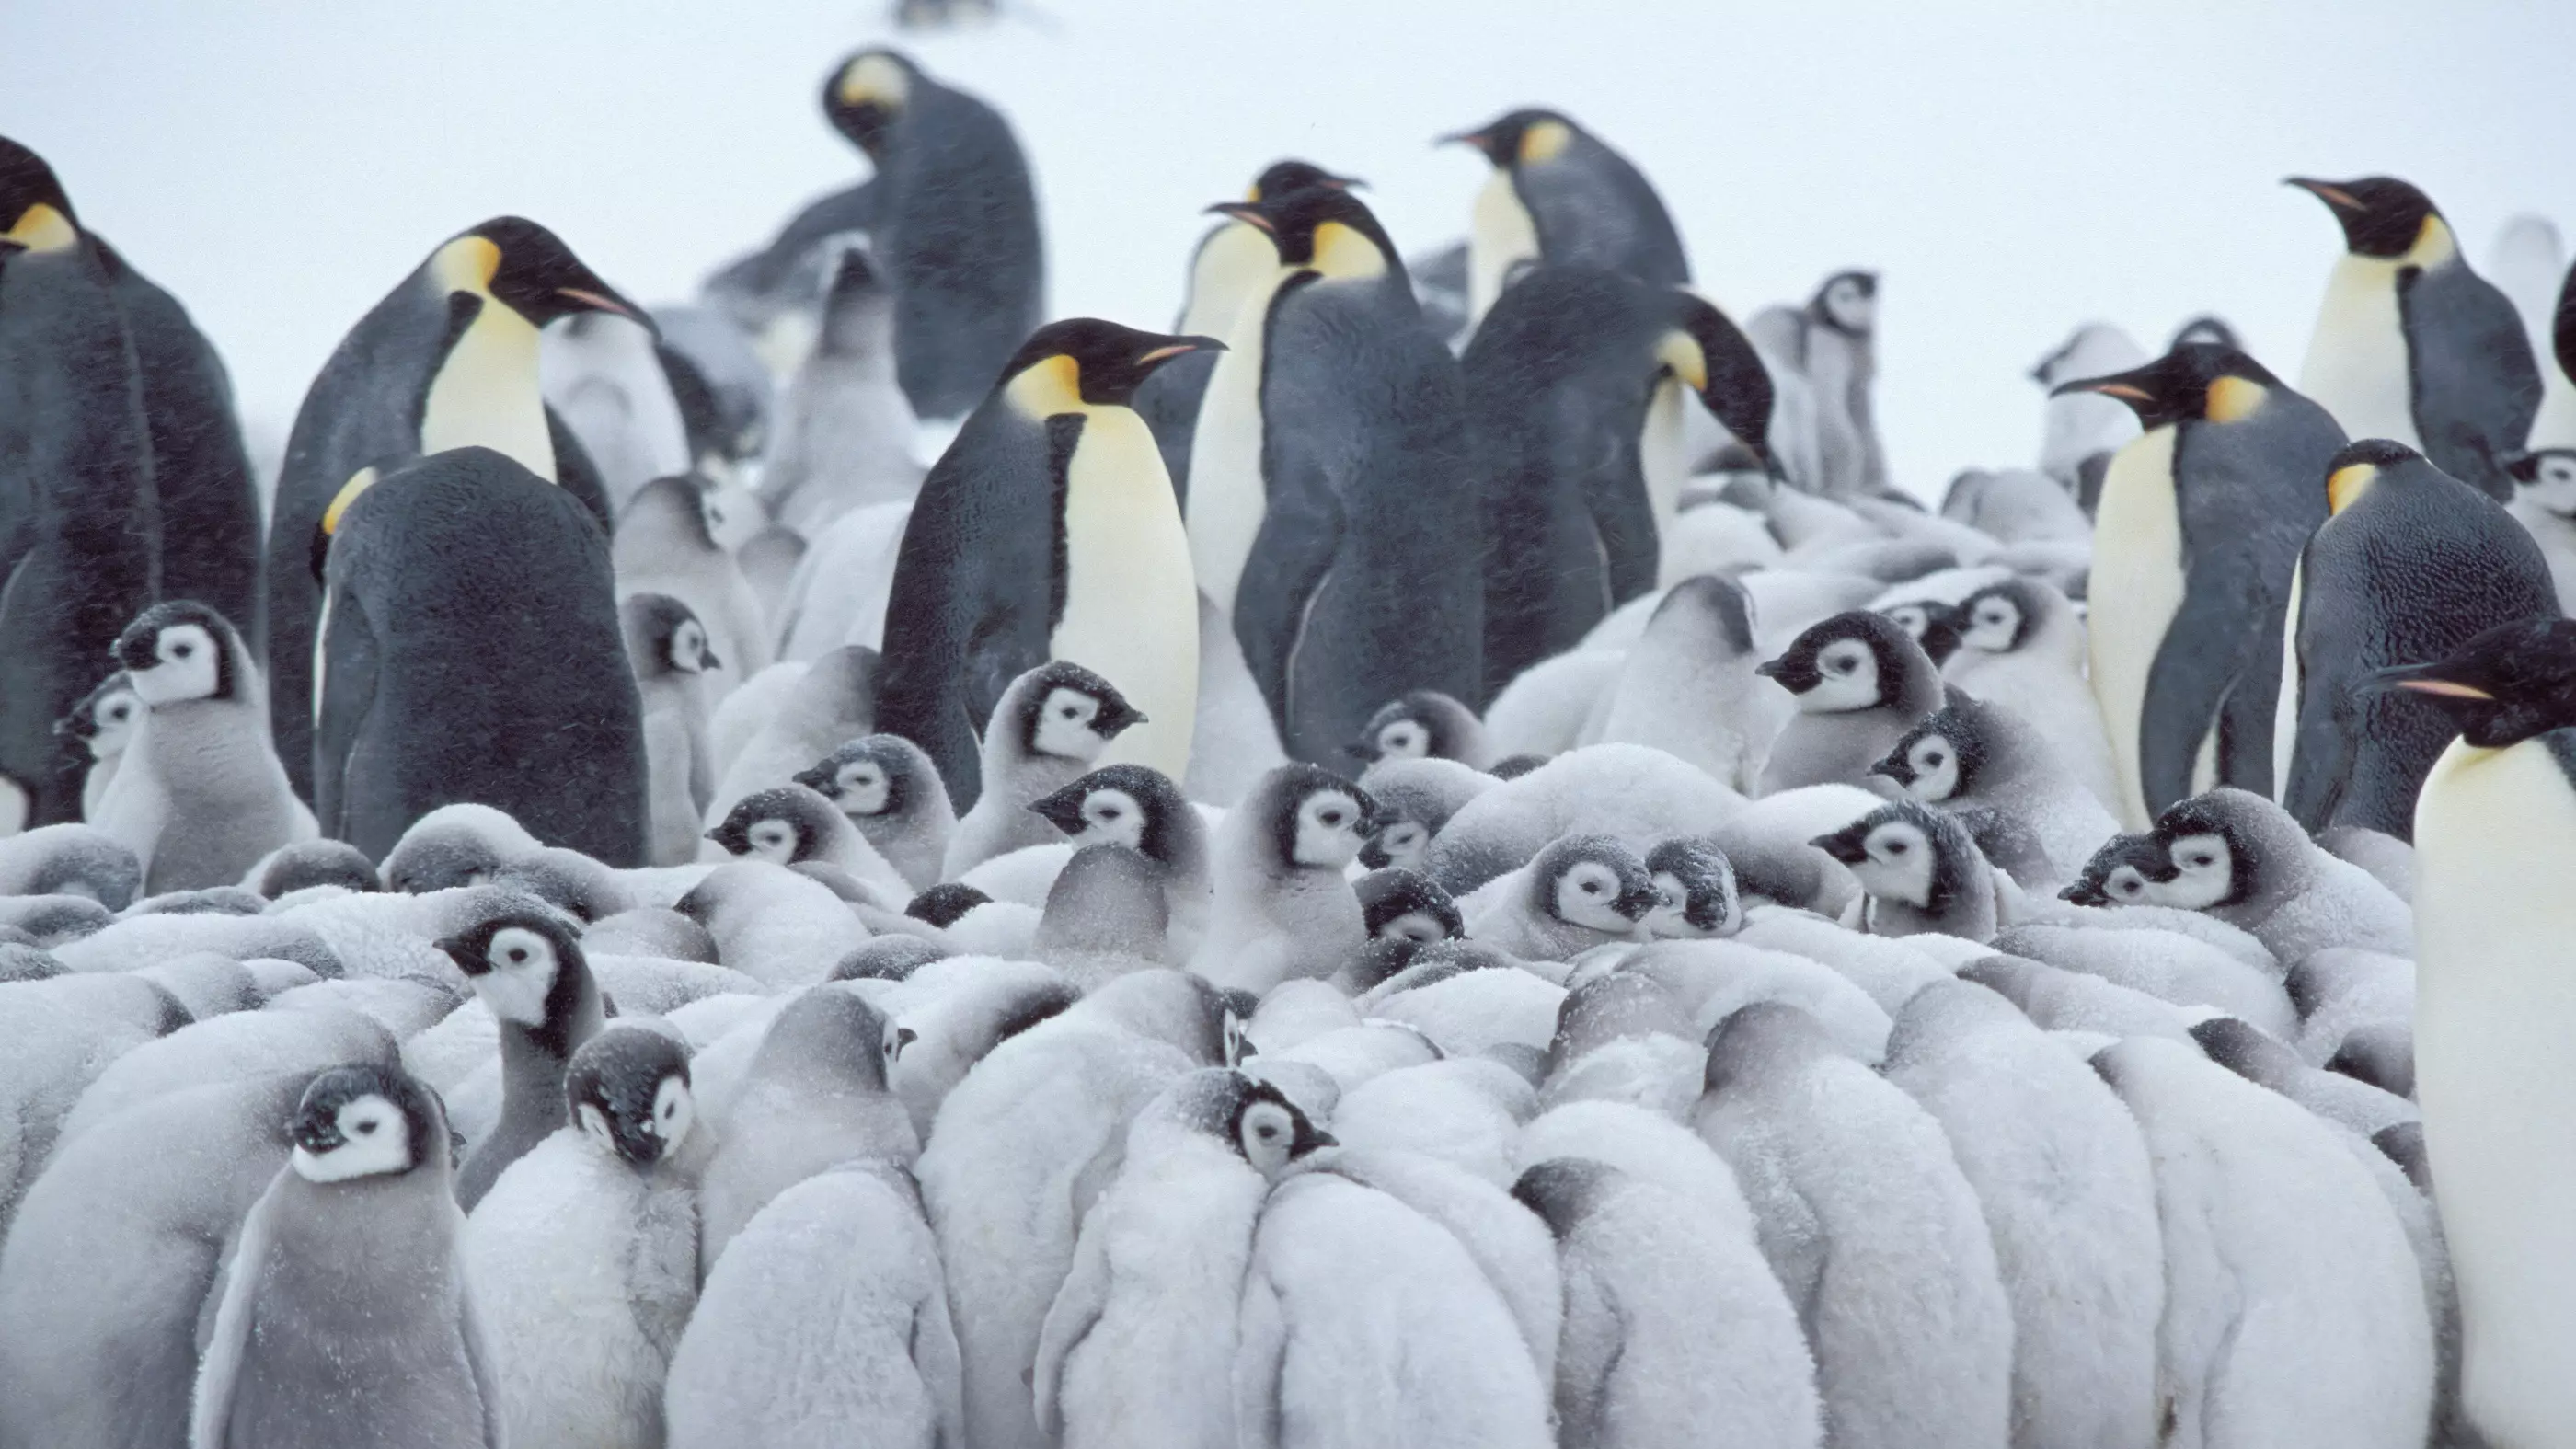 The Second Largest Emperor Penguin Colony In Antarctica Is Disappearing